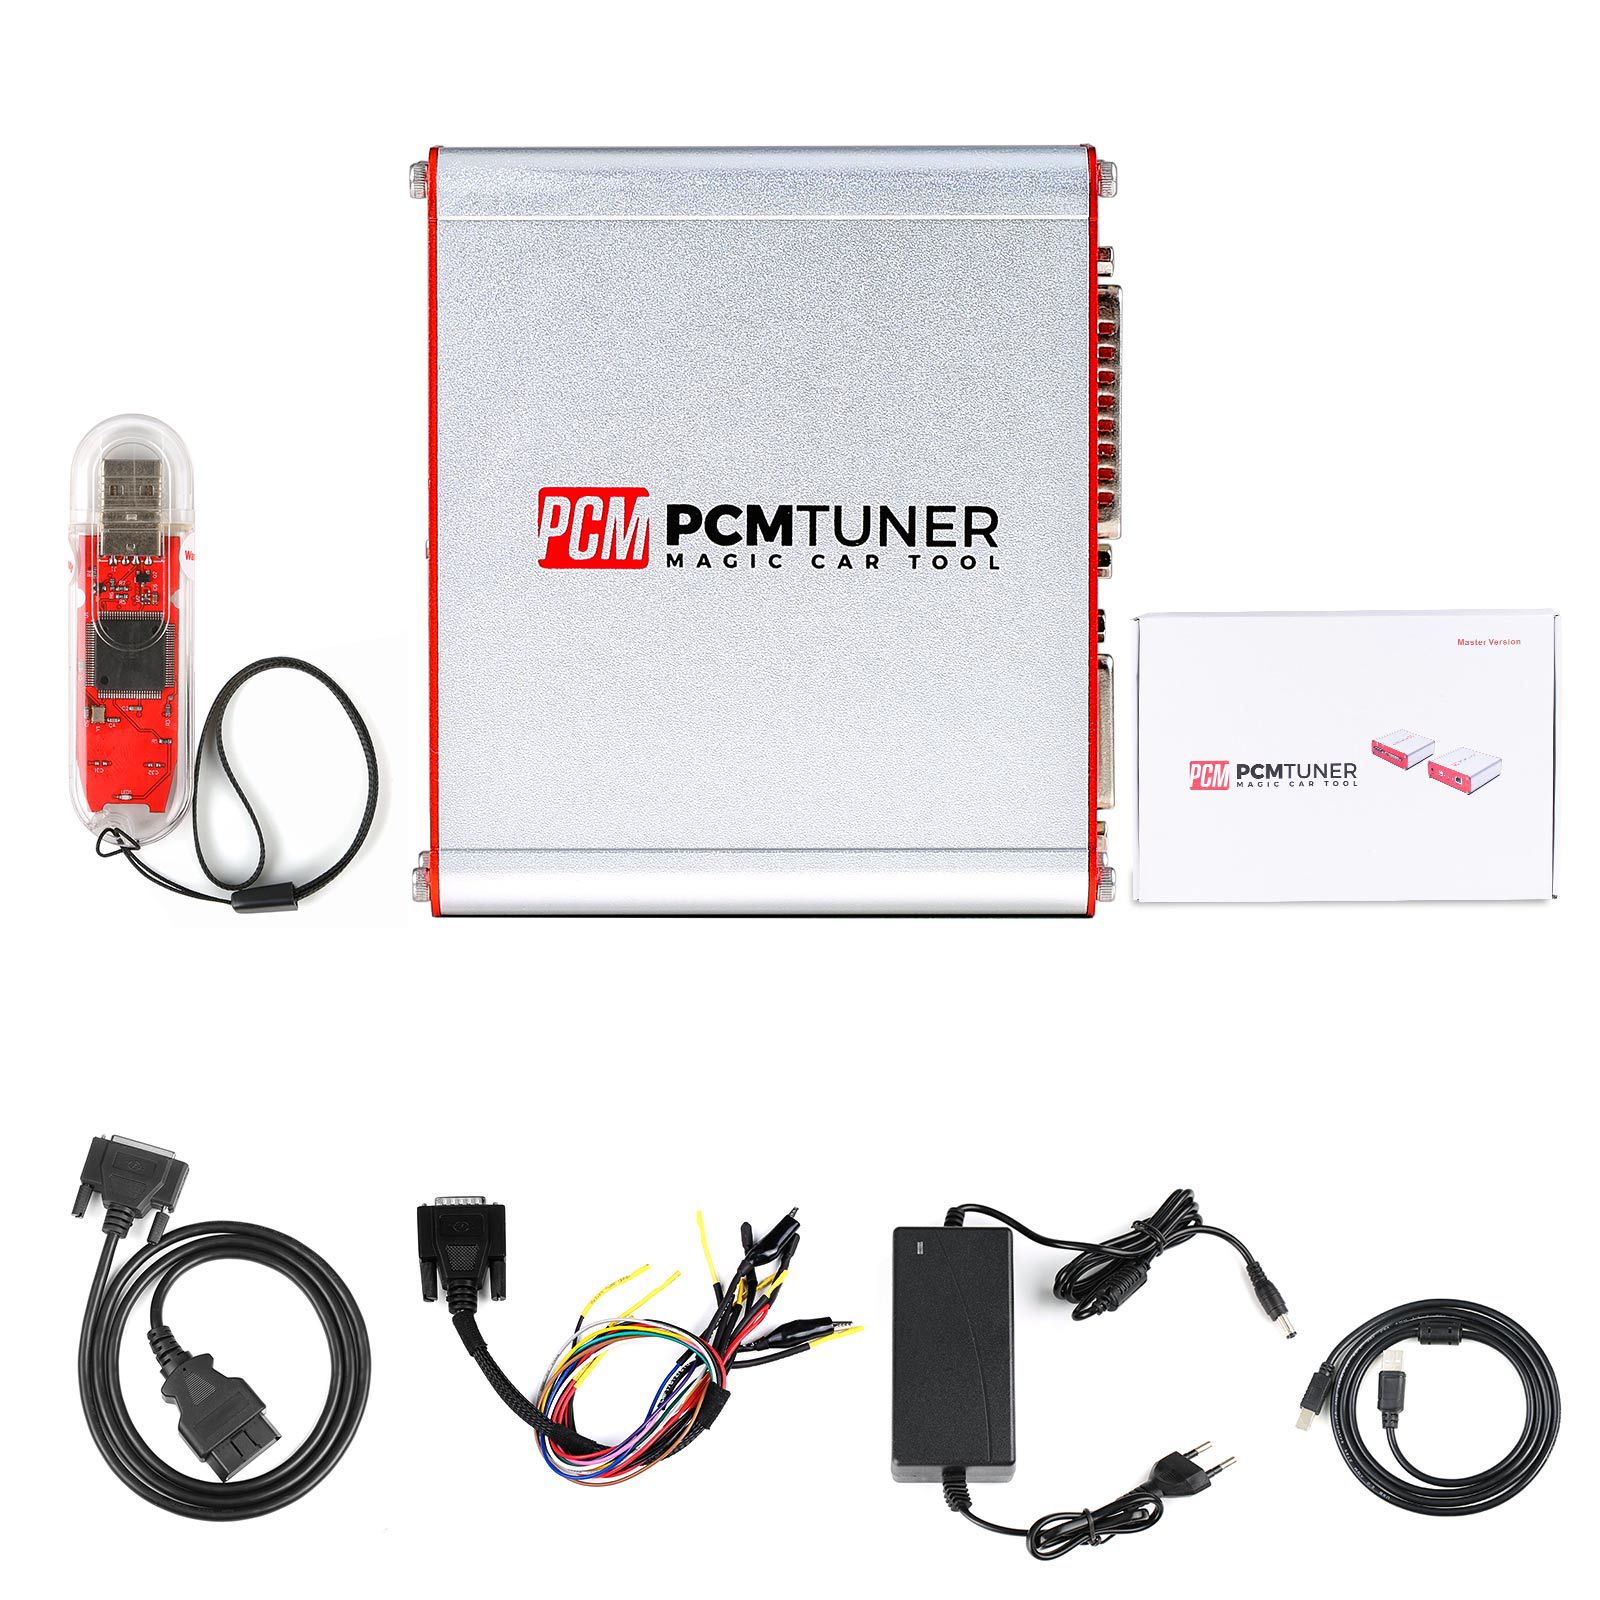 Pre-order PCMtuner ECU Programmer with 67 Modules with Silicone Case and Plastic Carrying Box